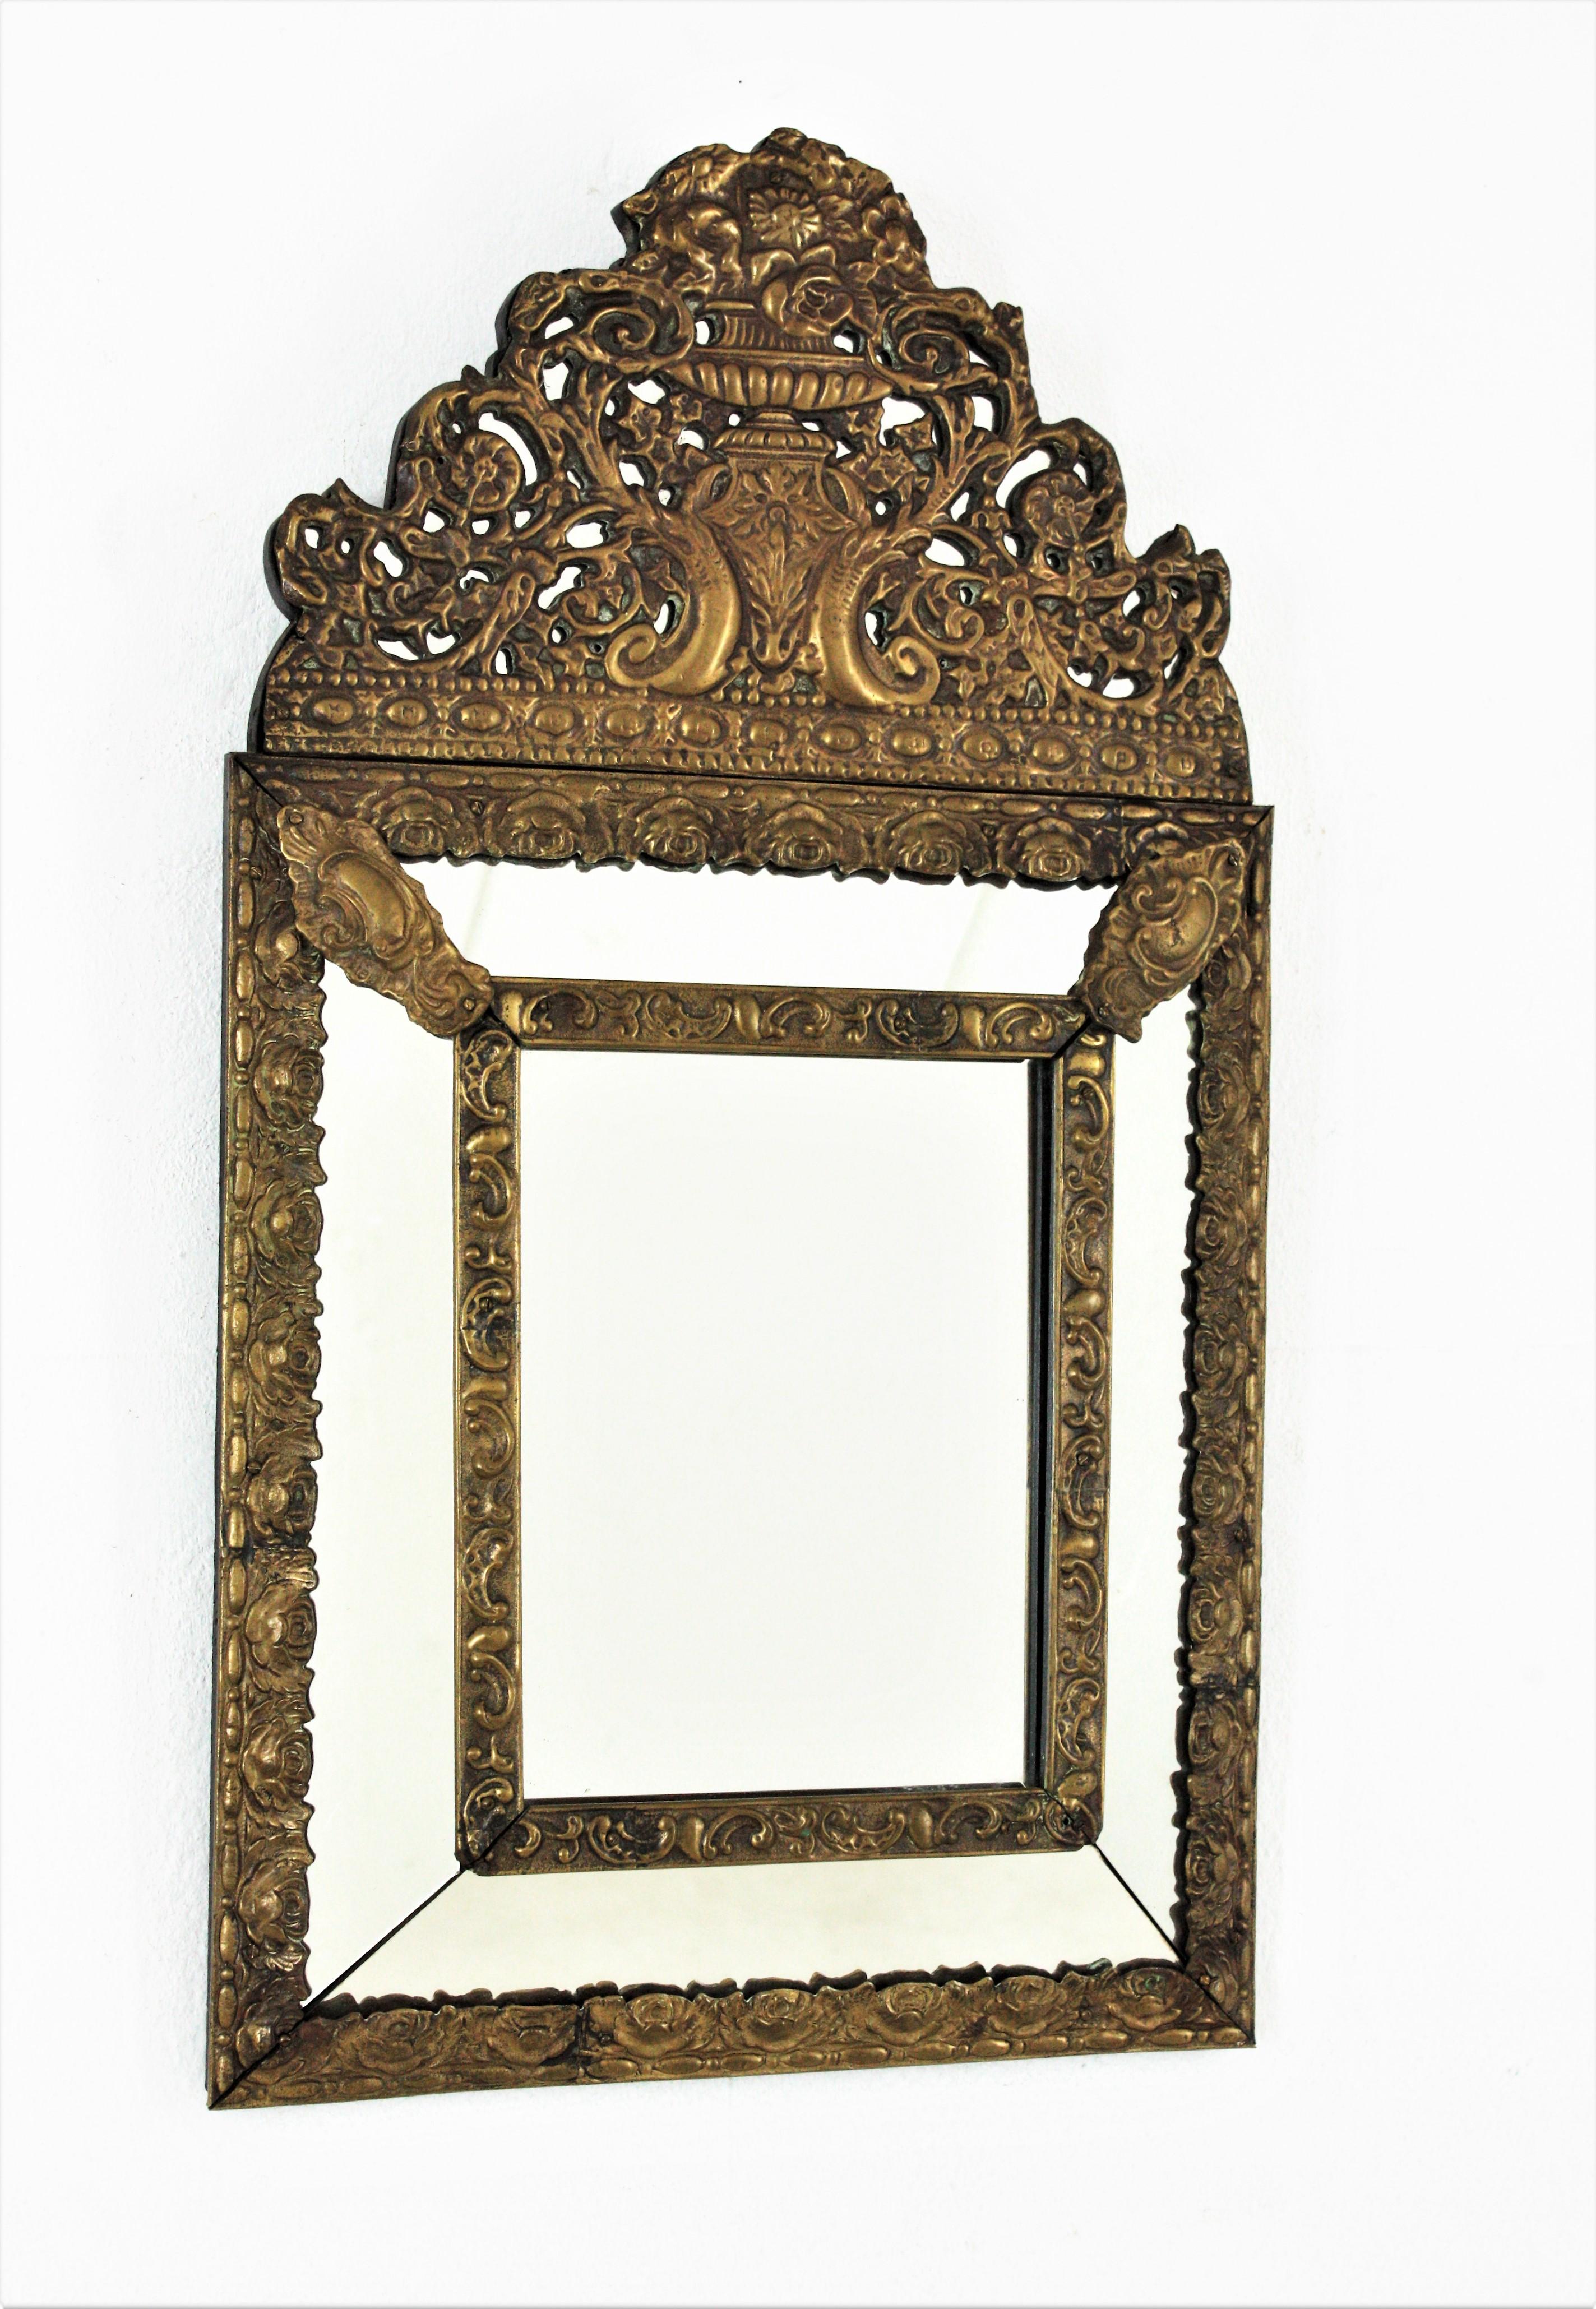 An elegant Napoleon III mirror made with central glass and four rectangular glasses joined between them by decorative brass repousse foliage floral patterns, an elegant filigree repousse brass crest.
This ornamented mirror is in very good